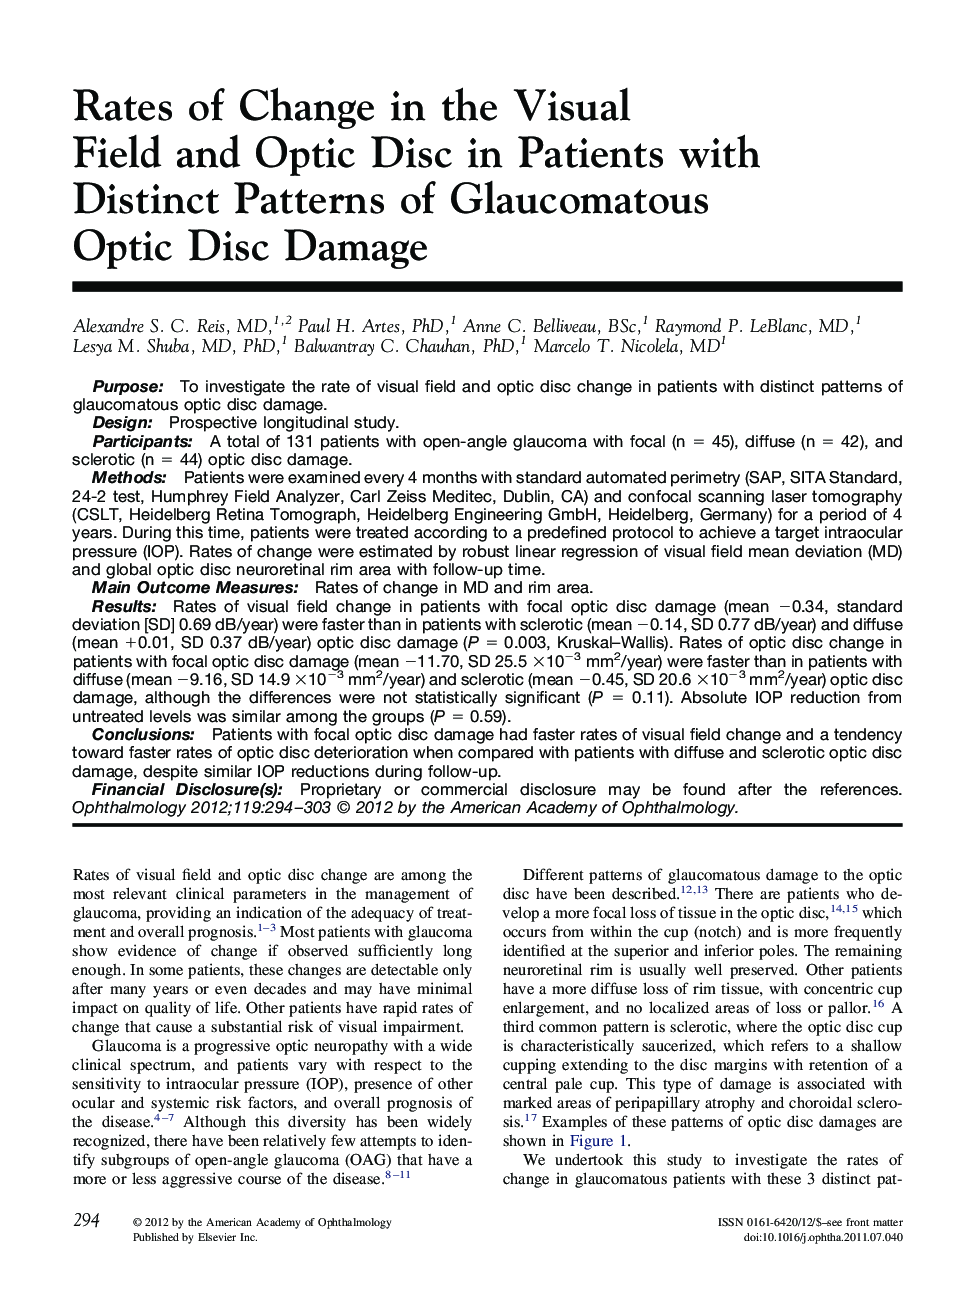 Rates of Change in the Visual Field and Optic Disc in Patients with Distinct Patterns of Glaucomatous Optic Disc Damage